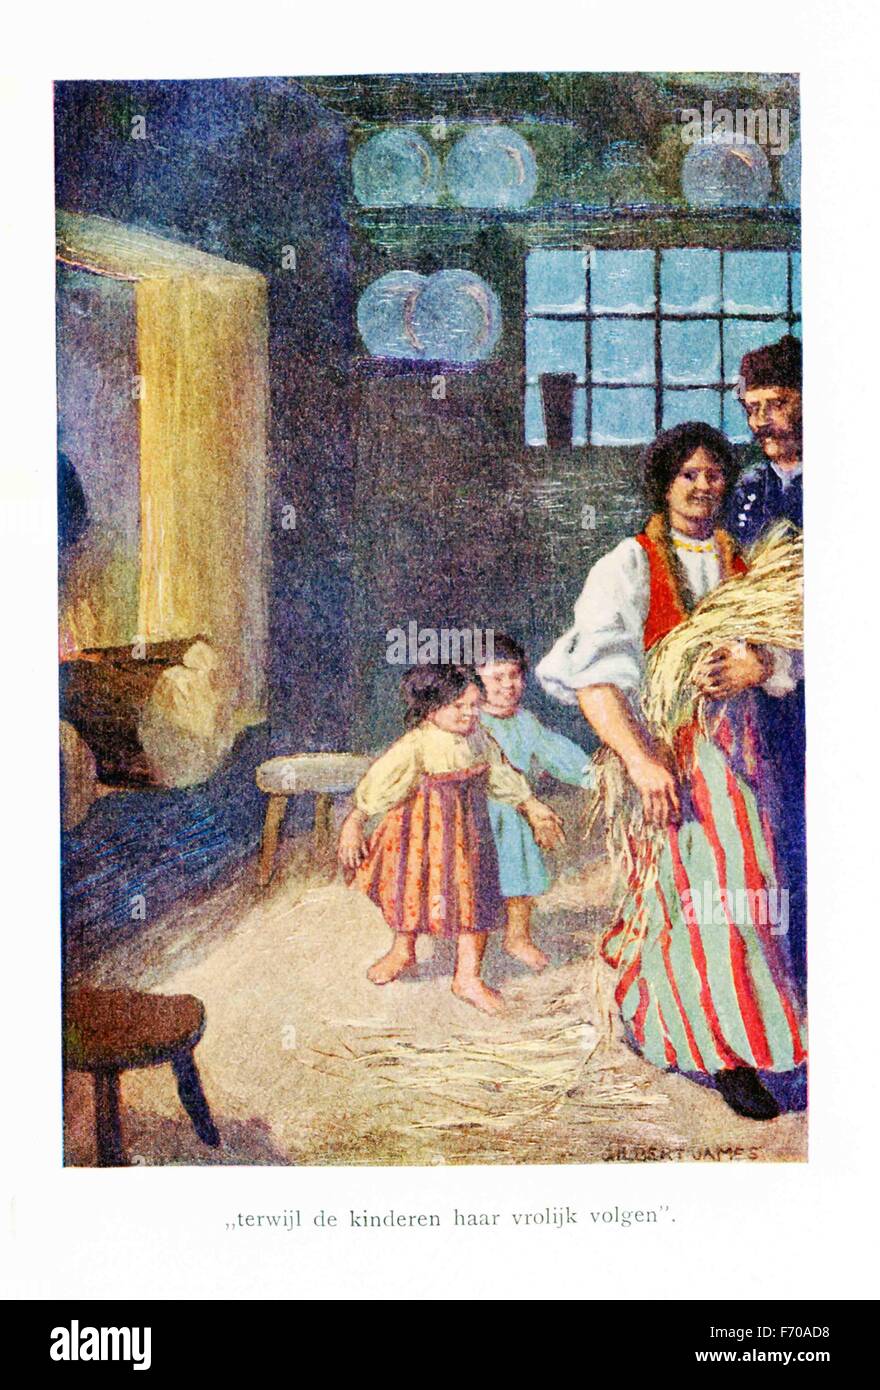 The caption for this illustration reads: While the children follow her gaily. The scene here is Christmas time, the day before Christmas, when a bundle of straw is strewn across the floor. The straw represents Jesus Christ's humble birth. The illustration is from a 1921 book on Serbian myths and legends. Stock Photo